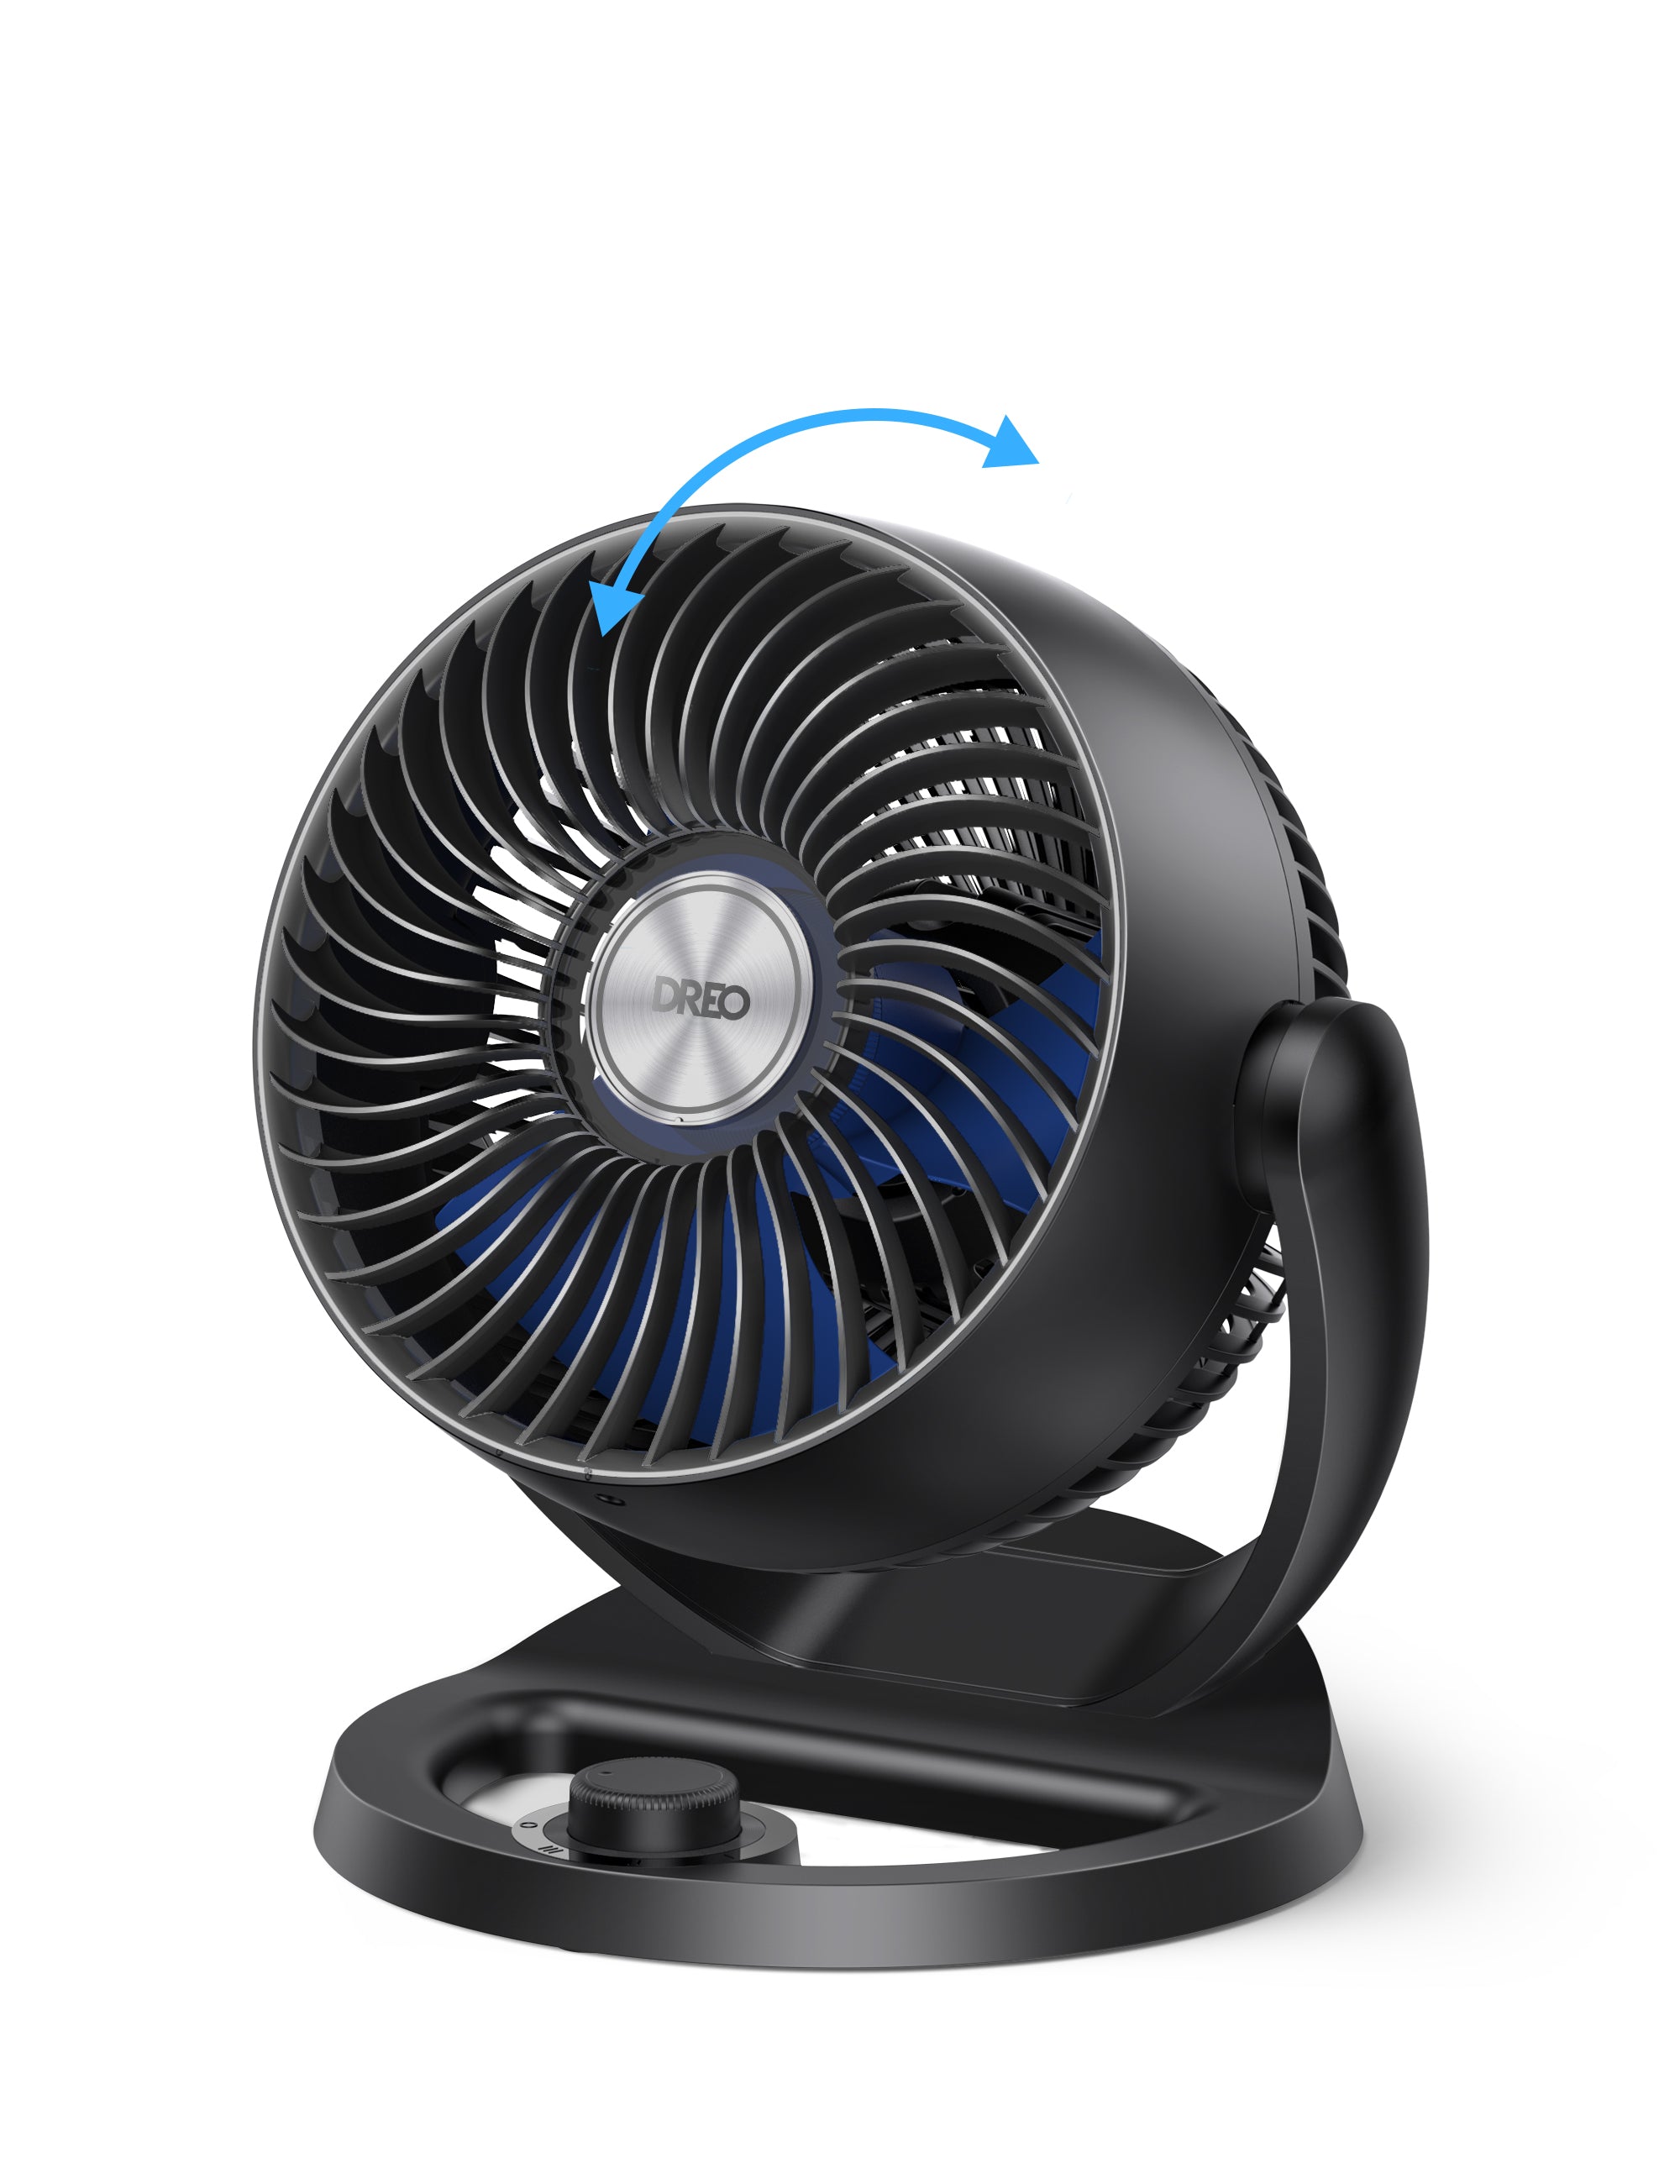 Dreo Table Fans for Home, Whole Room Air Circulator Fan, 70ft Powerful Airflow, 120° Adjustable Tilt, 28db Low Noise, 3 Speeds, 12" Quiet Small Desk Fan for Bedroom, Office